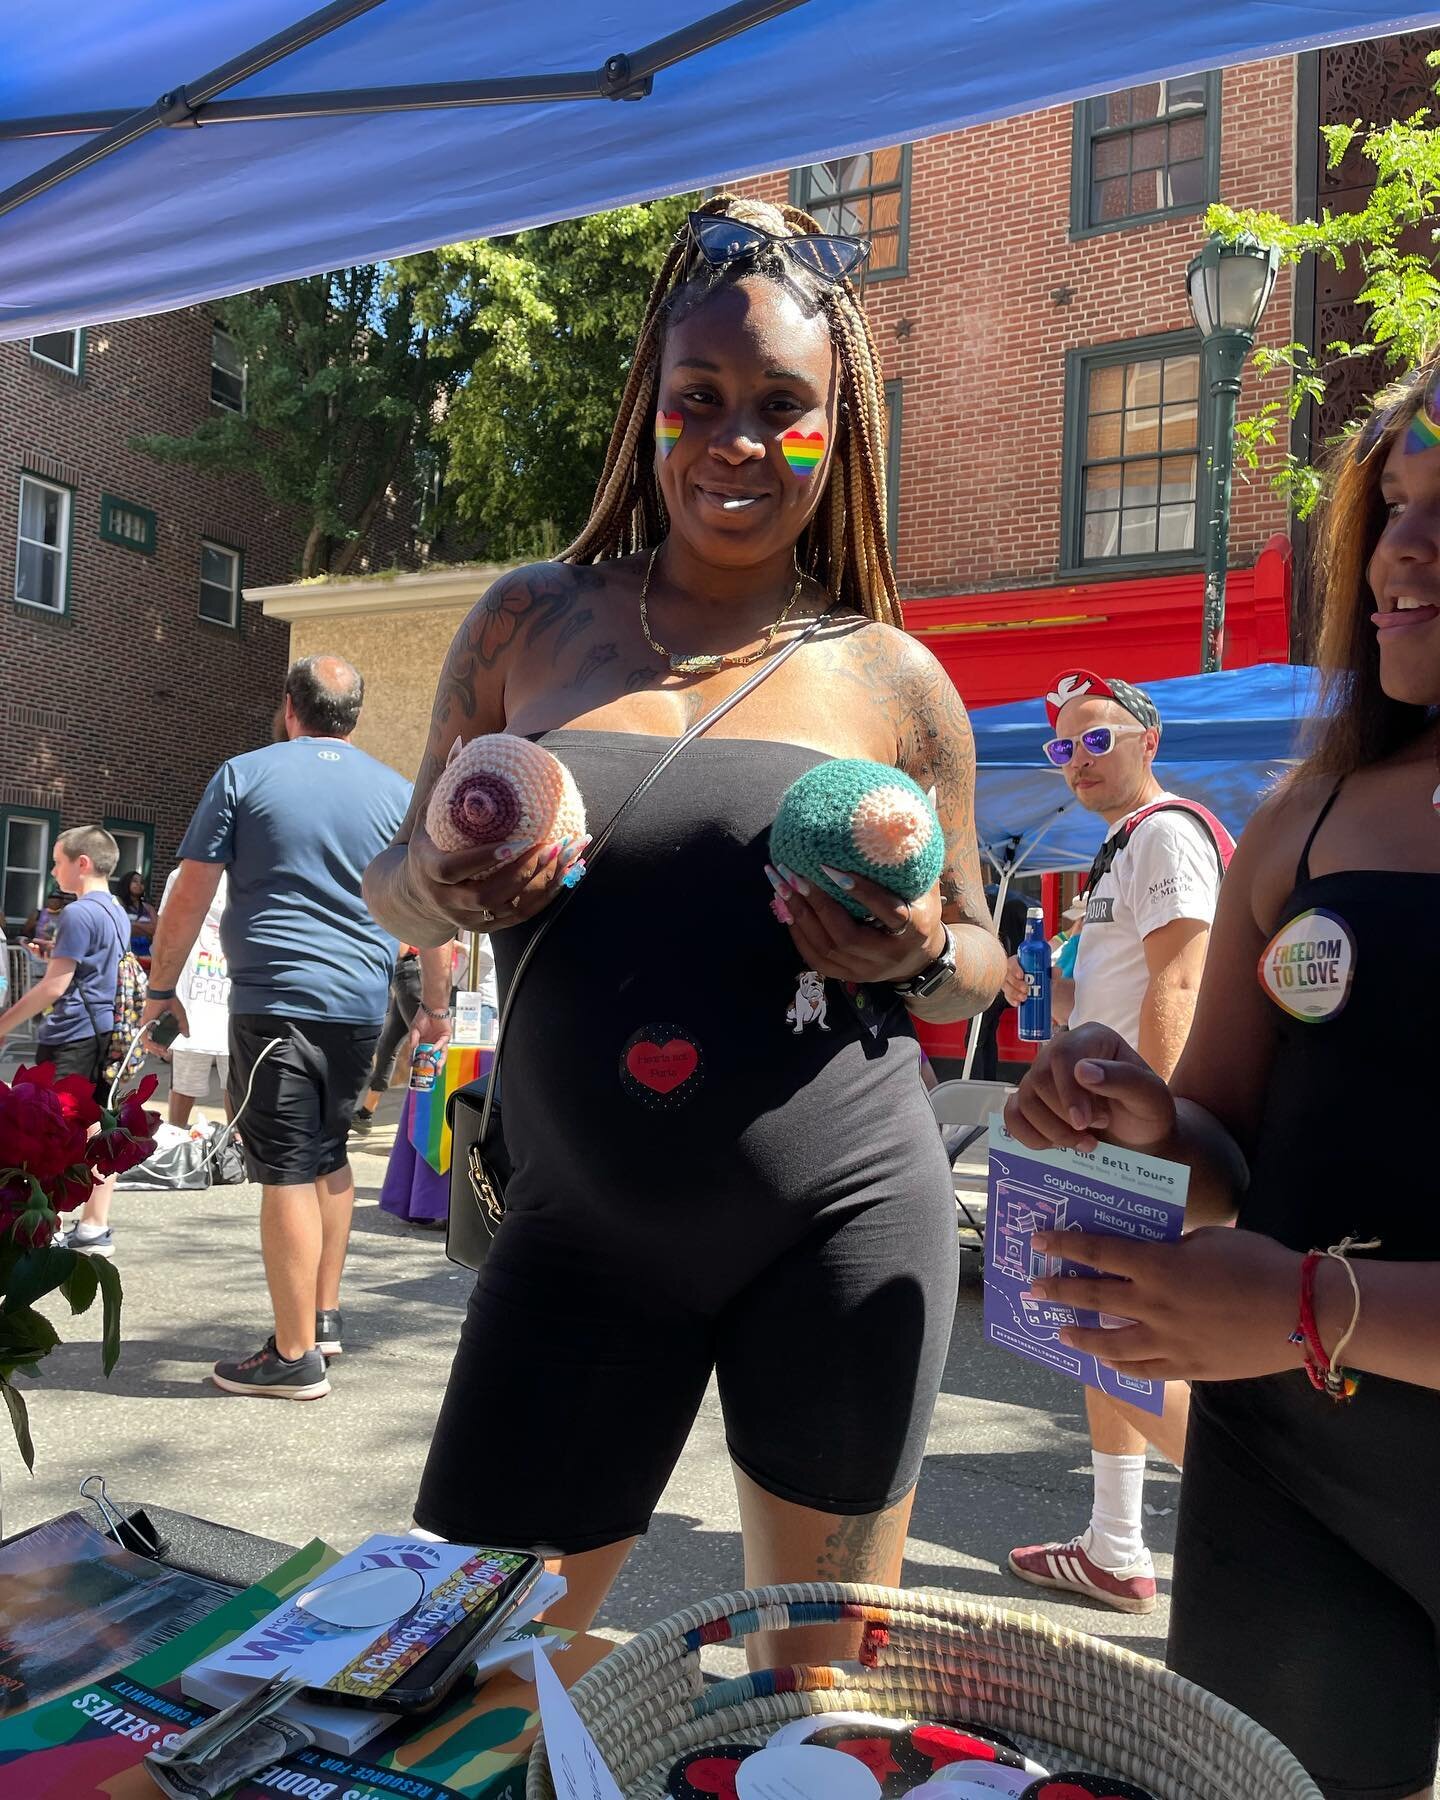 @steph.b.ibclc and I had the best time connecting with folks at #phillypride, talking about what midwives and IBCLCs do and our birth center project. So many past clients found their way over, and we mused about the nature of the midwifery relationsh